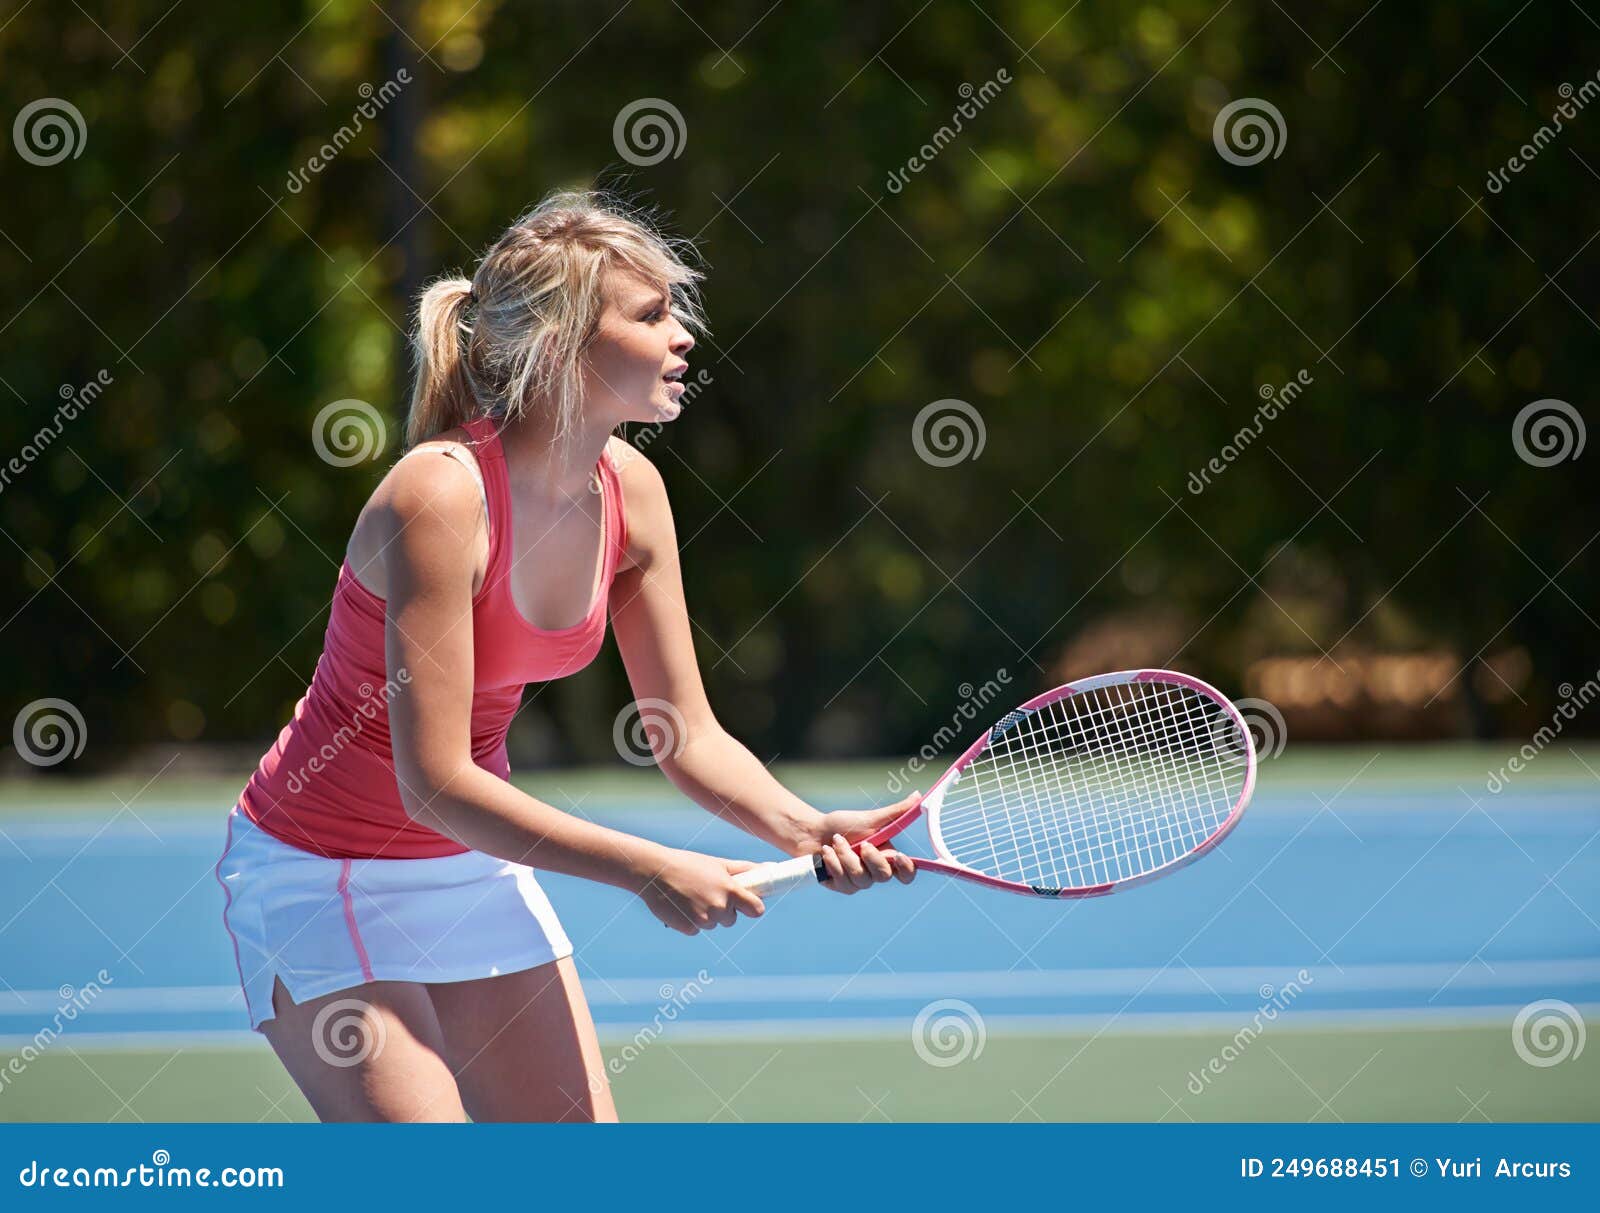 Ready To Win A Tennis Player With Her Tennis Racket On A Tennis Court Stock Image Image Of